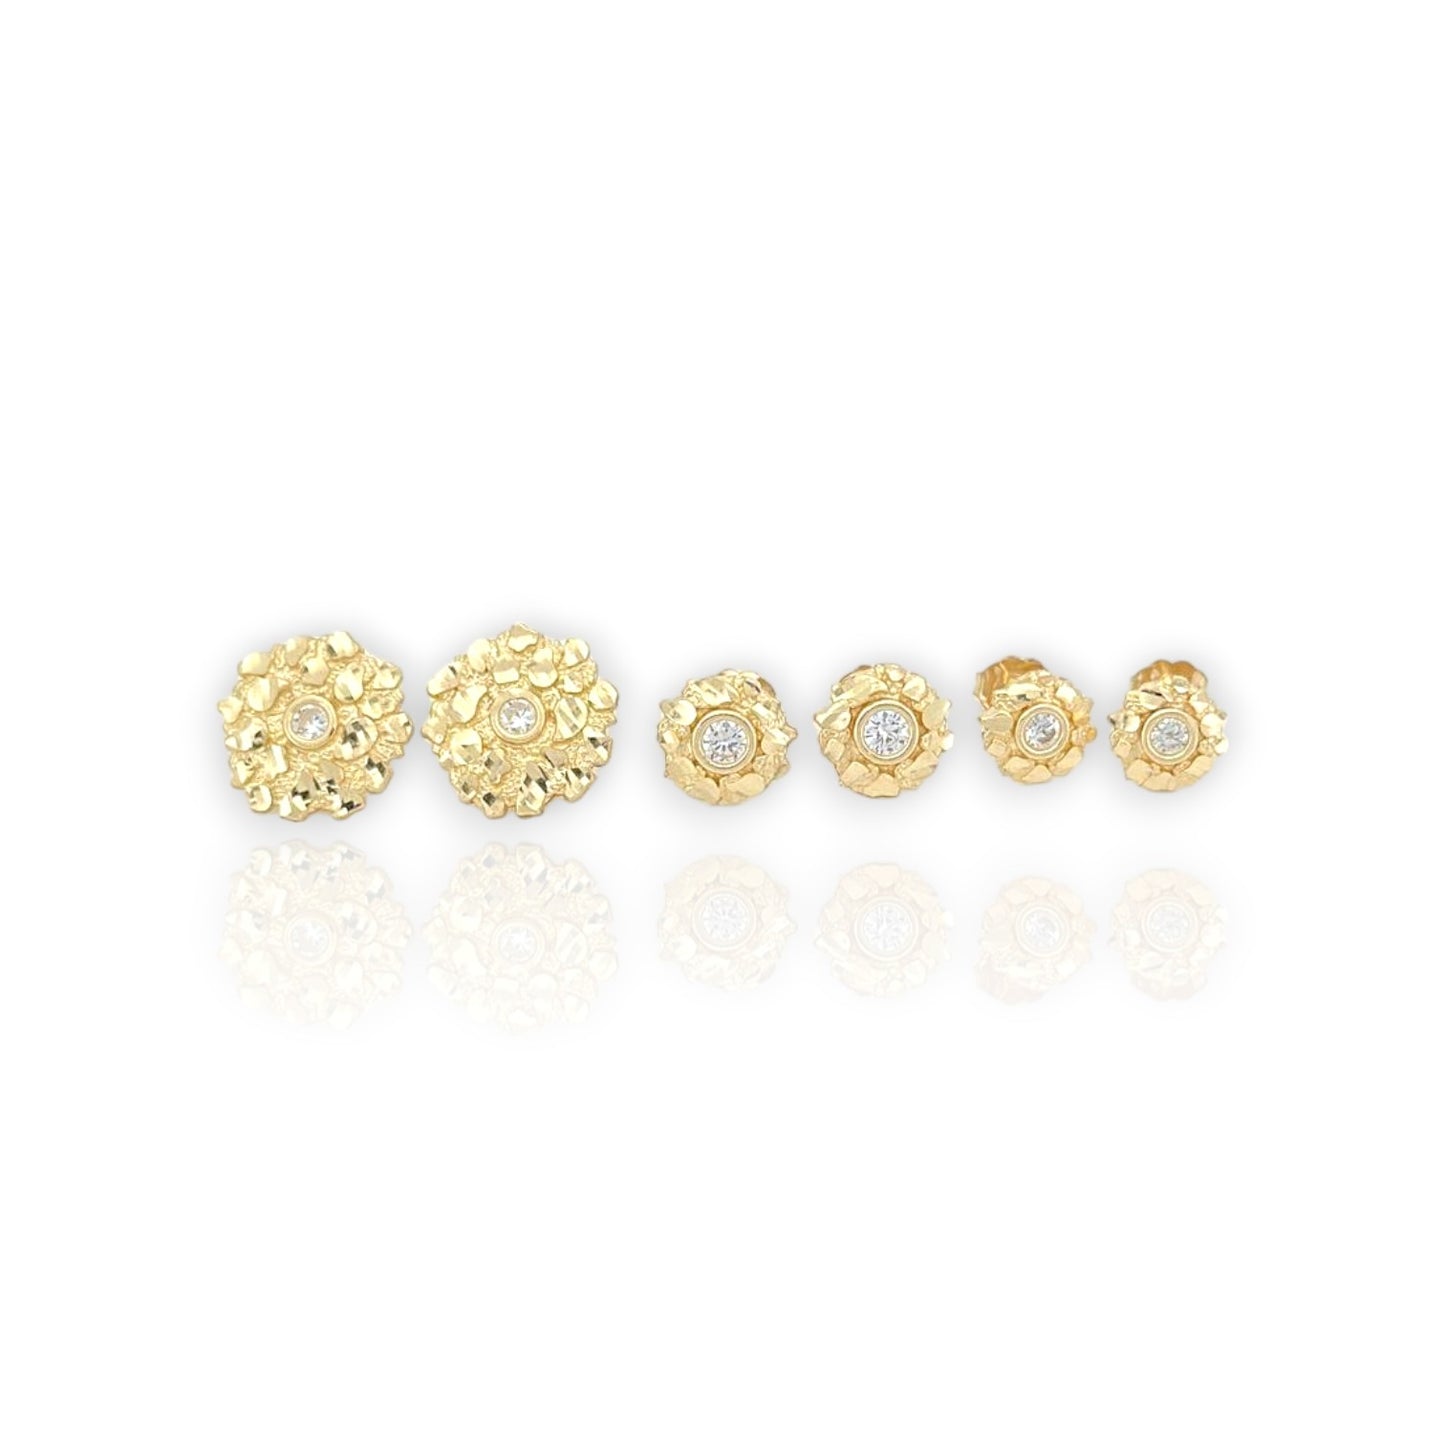 Round Nugget ZC Stud Earrings - 10K Yellow Gold